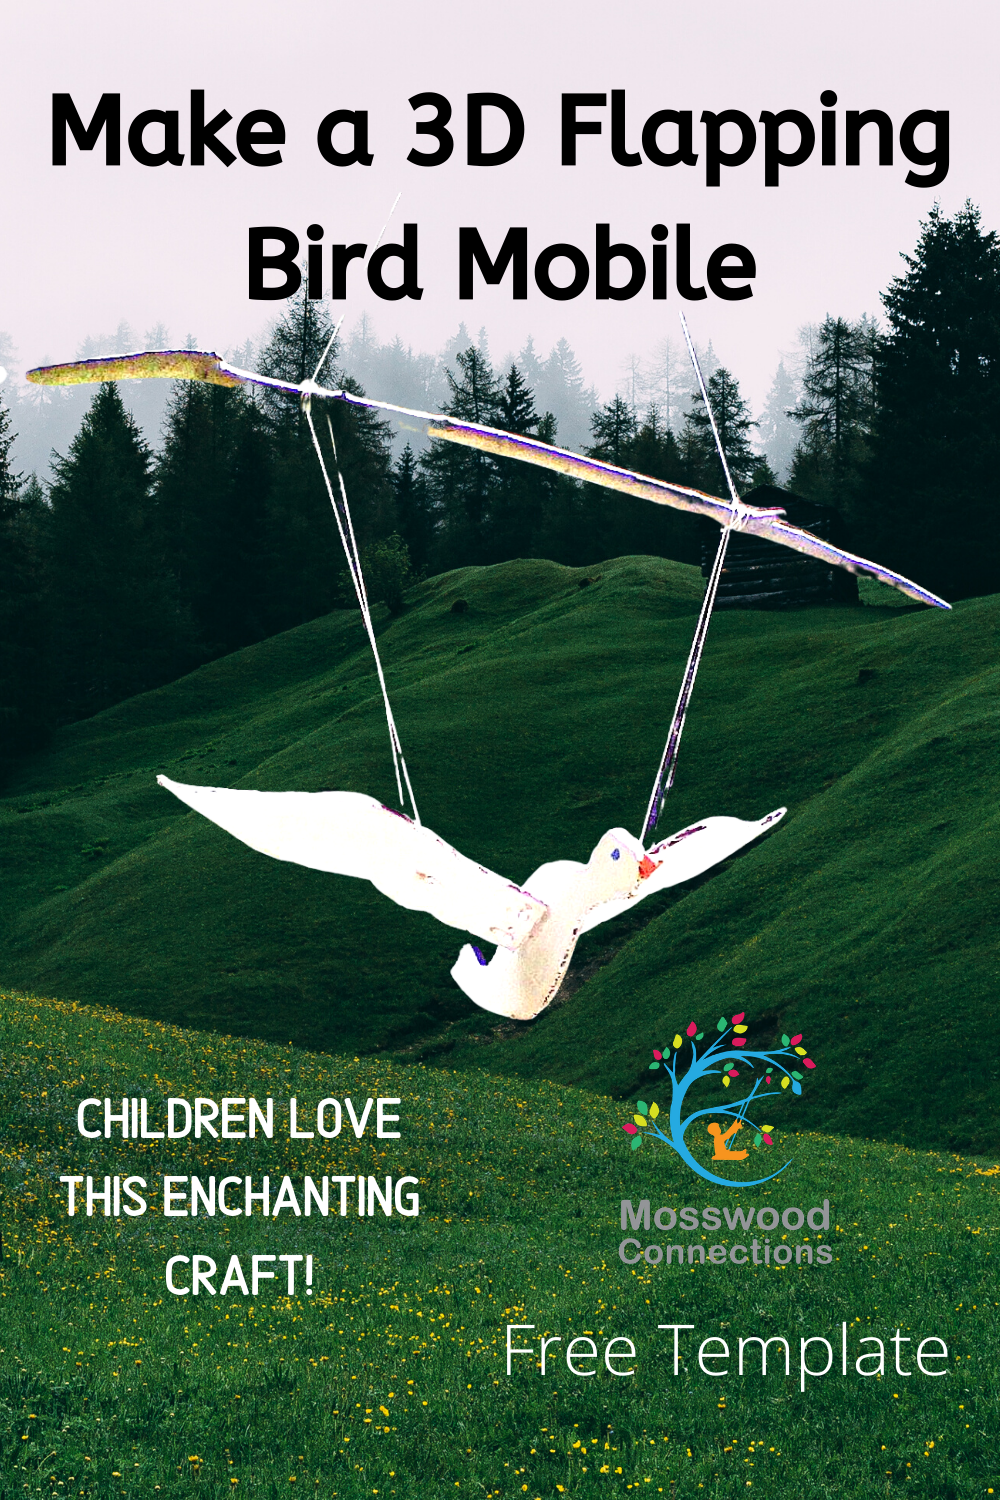 Make a 3D Flapping Bird Mobile with Recycled Cardboard #mosswoodconnections #3Dcrafts #craftsforkids #birdcraft #recycled